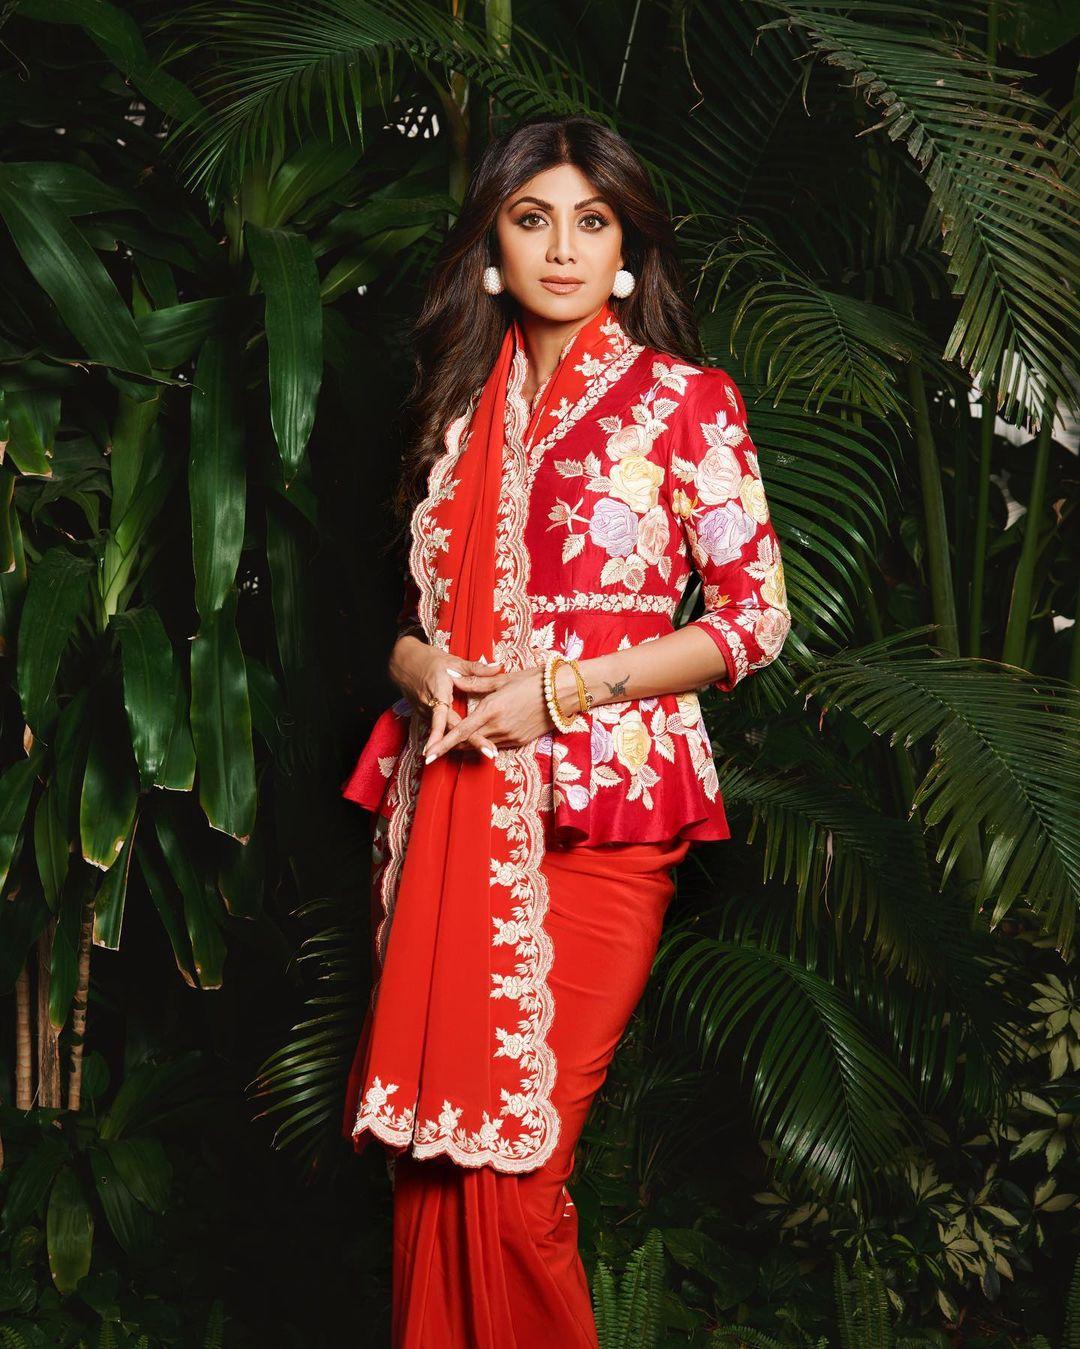 Shilpa Shetty looked absolutely gorgeous in a crimson saree she picked up from Ashdeen's collection. The saree had a unique peplum style and was adorned with a stunning pattern in soft white and pastel hues. The floral designs on the saree were so captivating, you couldn't help but be charmed by them. 